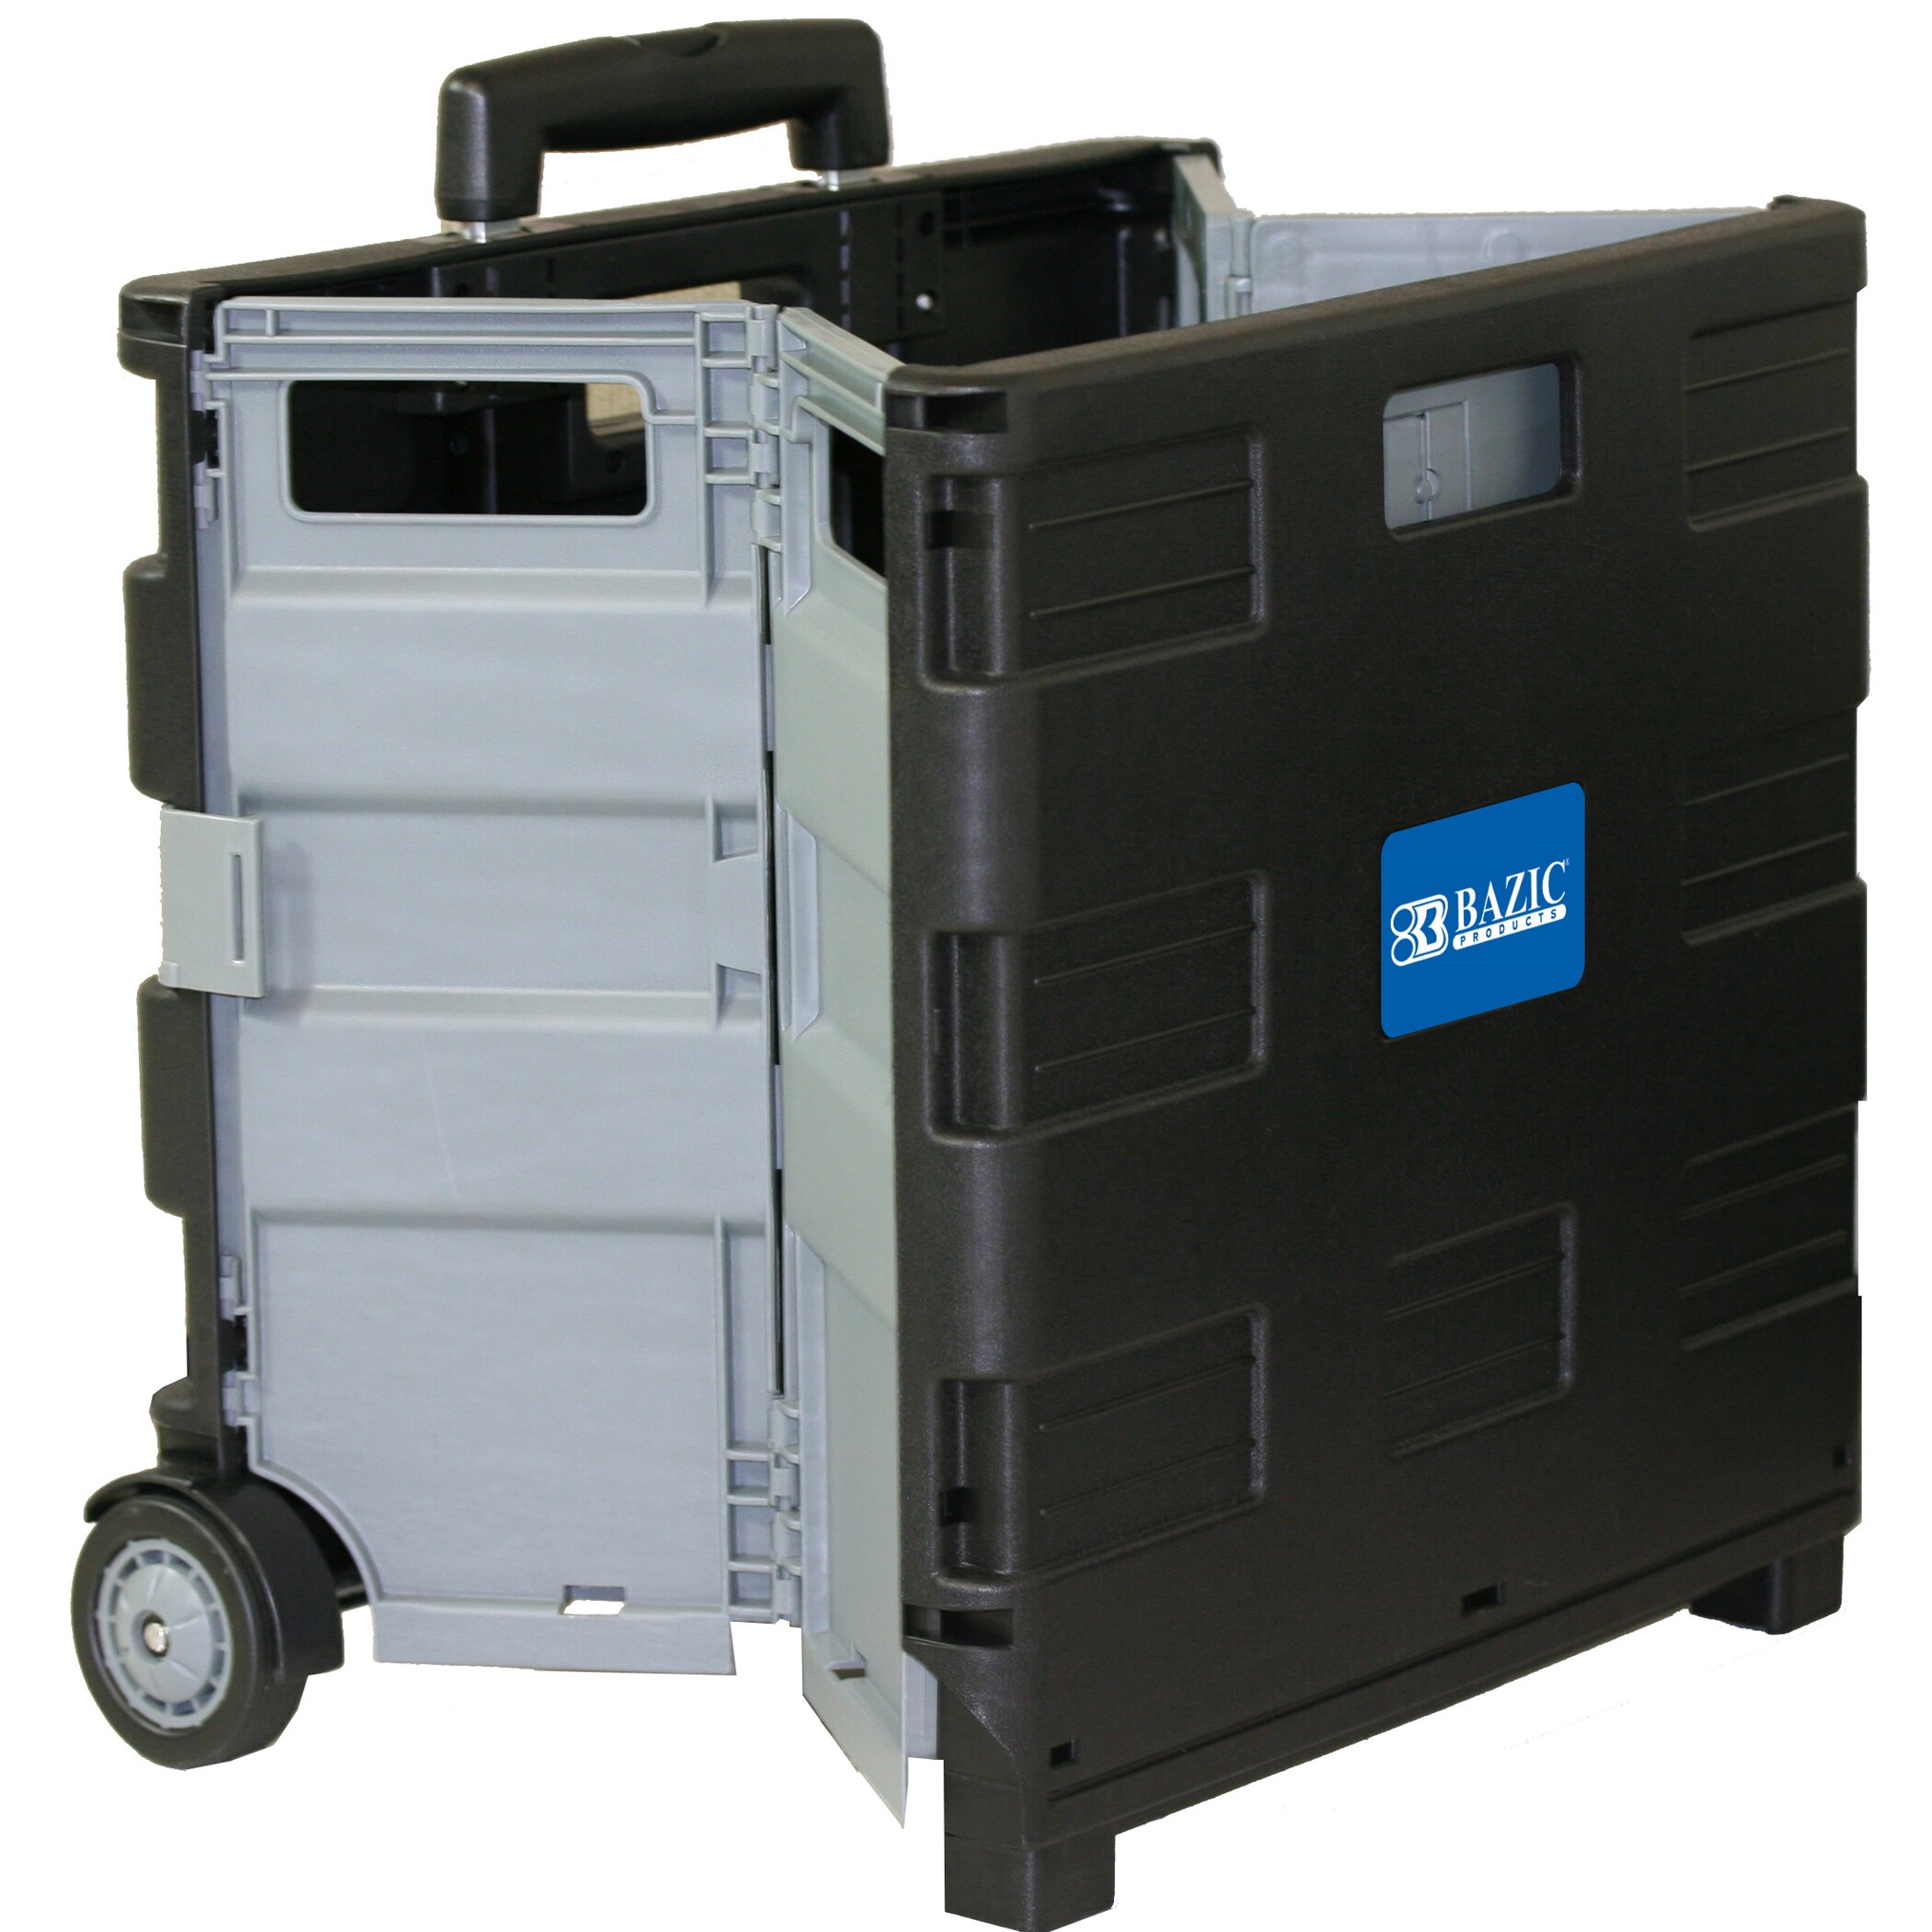 Folding Cart On Wheels with Lid Cover Black BAZIC 16 x 18 x 15 Inches 2196 